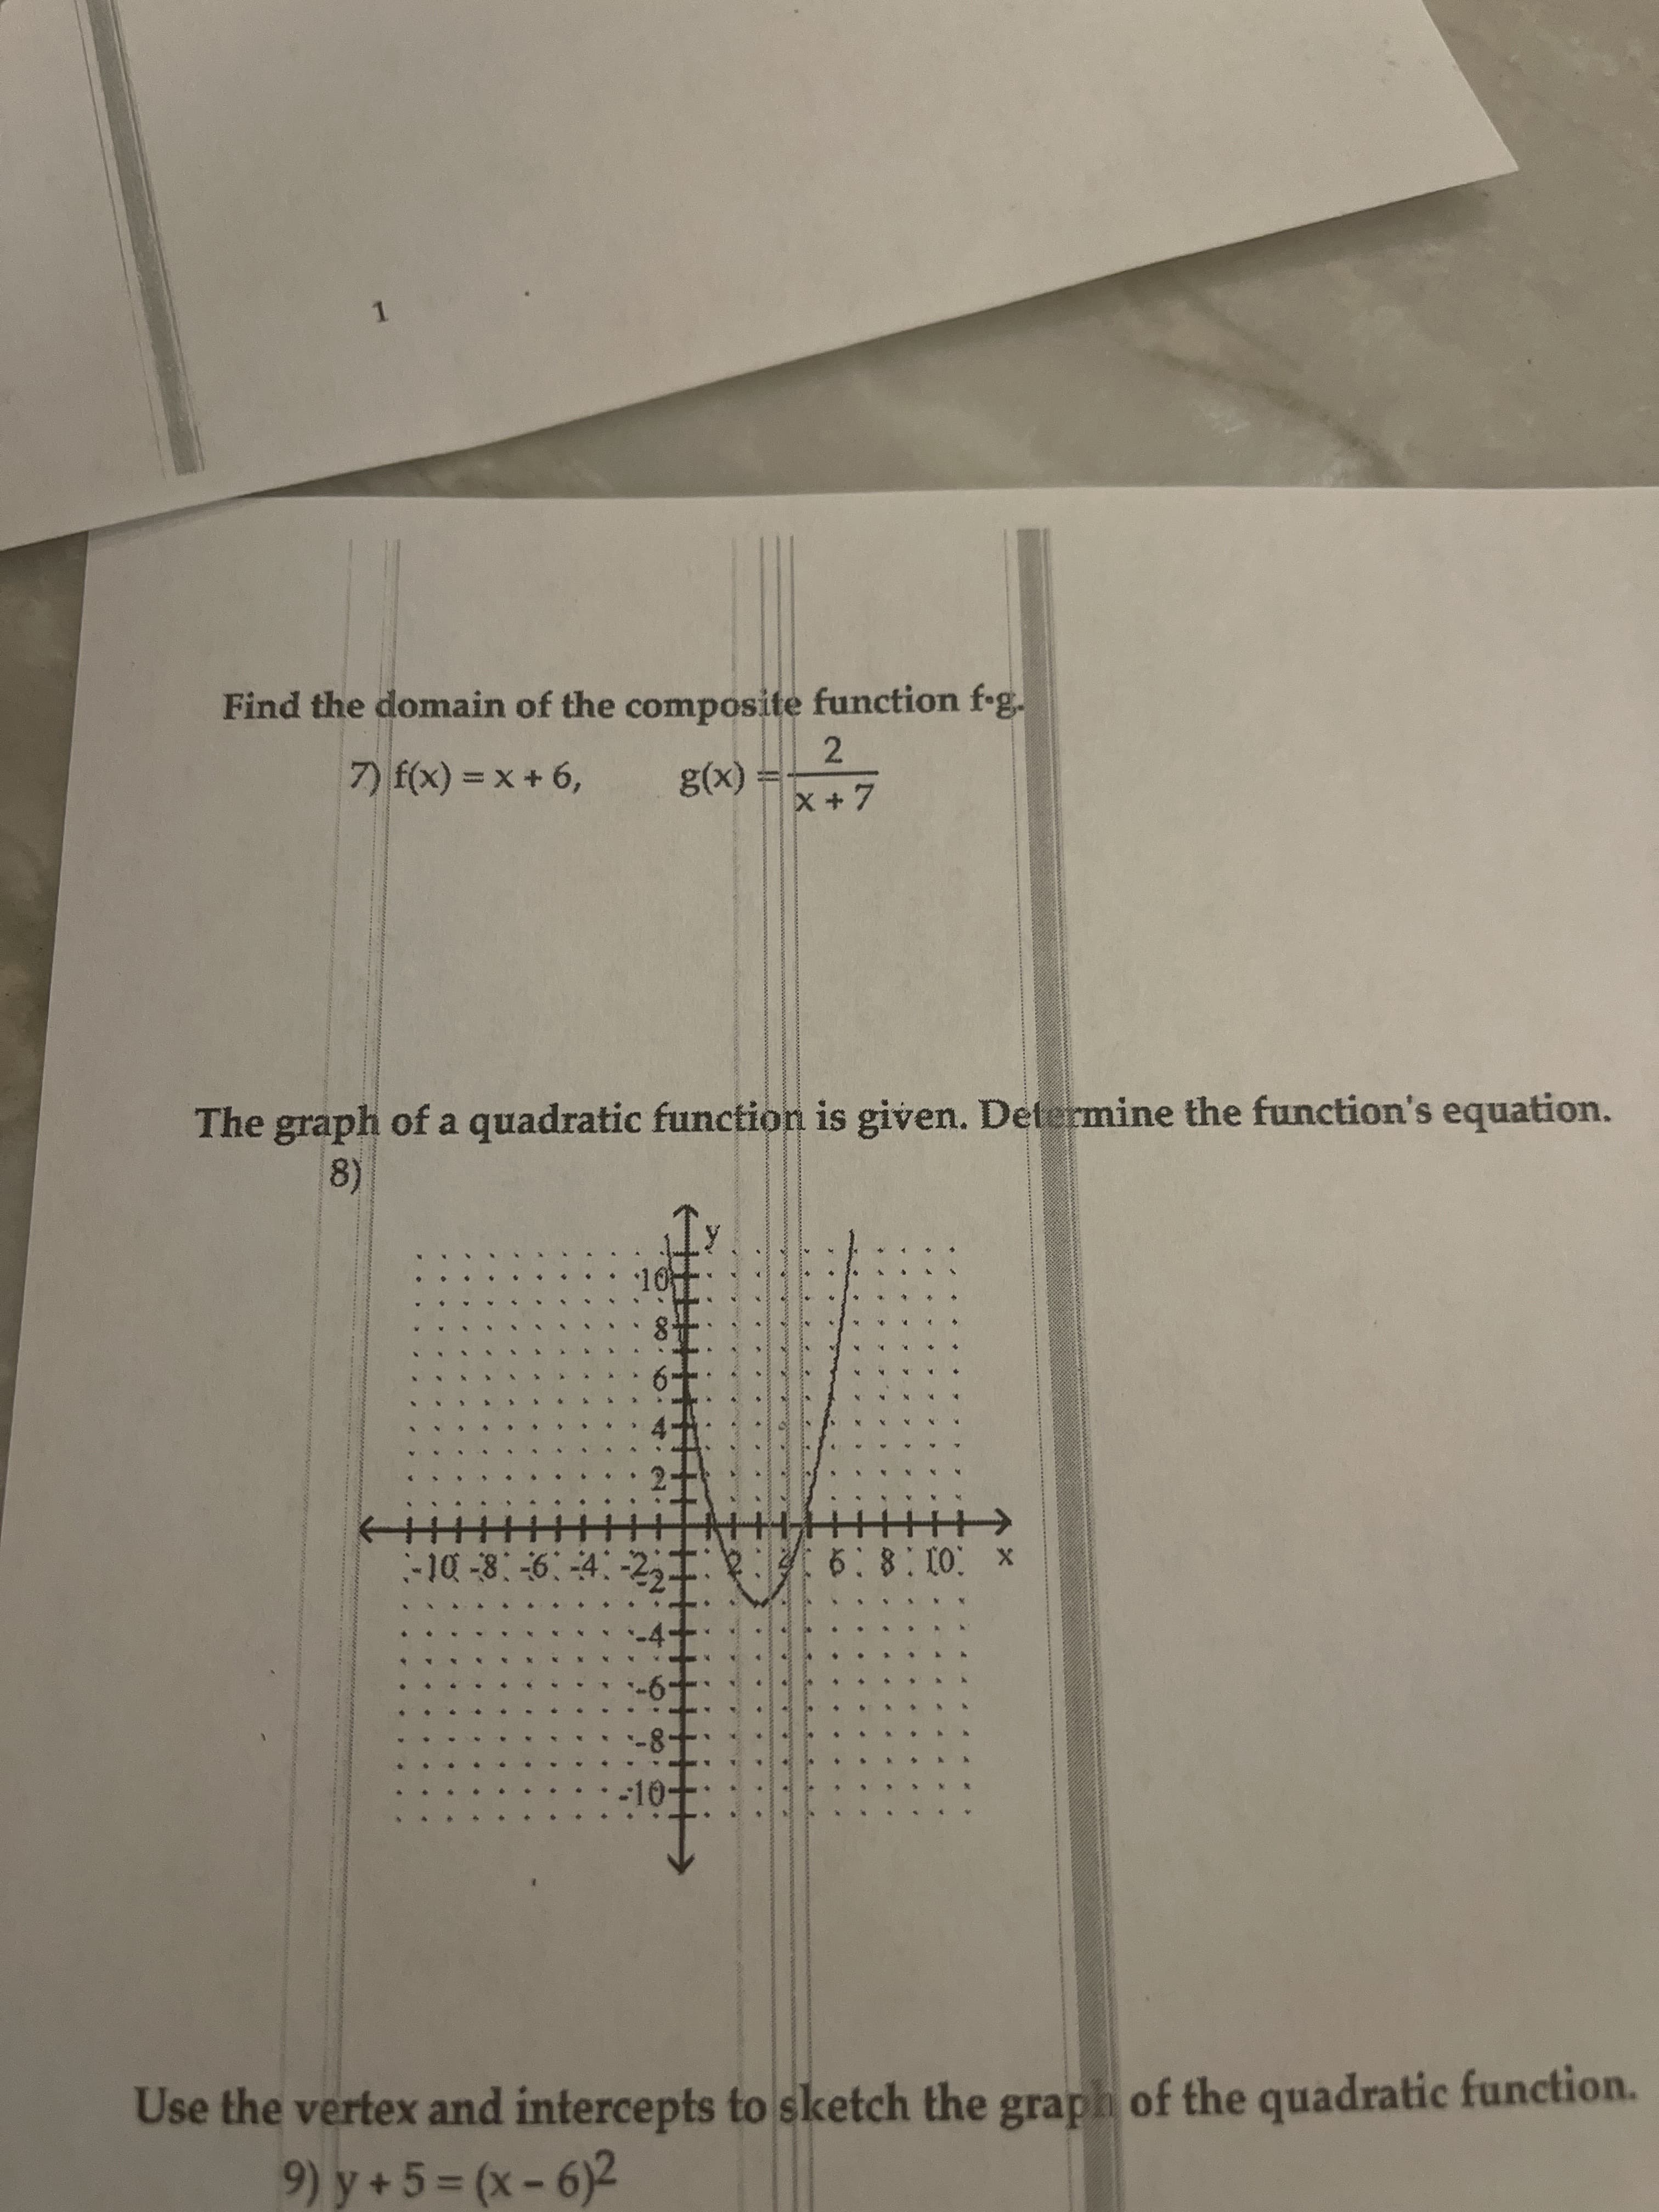 1.
Find the domain of the composite function f-g.
2.
(x)
X +7
7) f(x) = x + 6,
%3D
The graph of a quadratic function is given. Determine the function's equation.
8)
x :01:8:9
:-10-8:-6 4:-2,
Use the vertex and intercepts to sketch the graph of the quadratic function.
9) y + 5 = (x - 6)2
